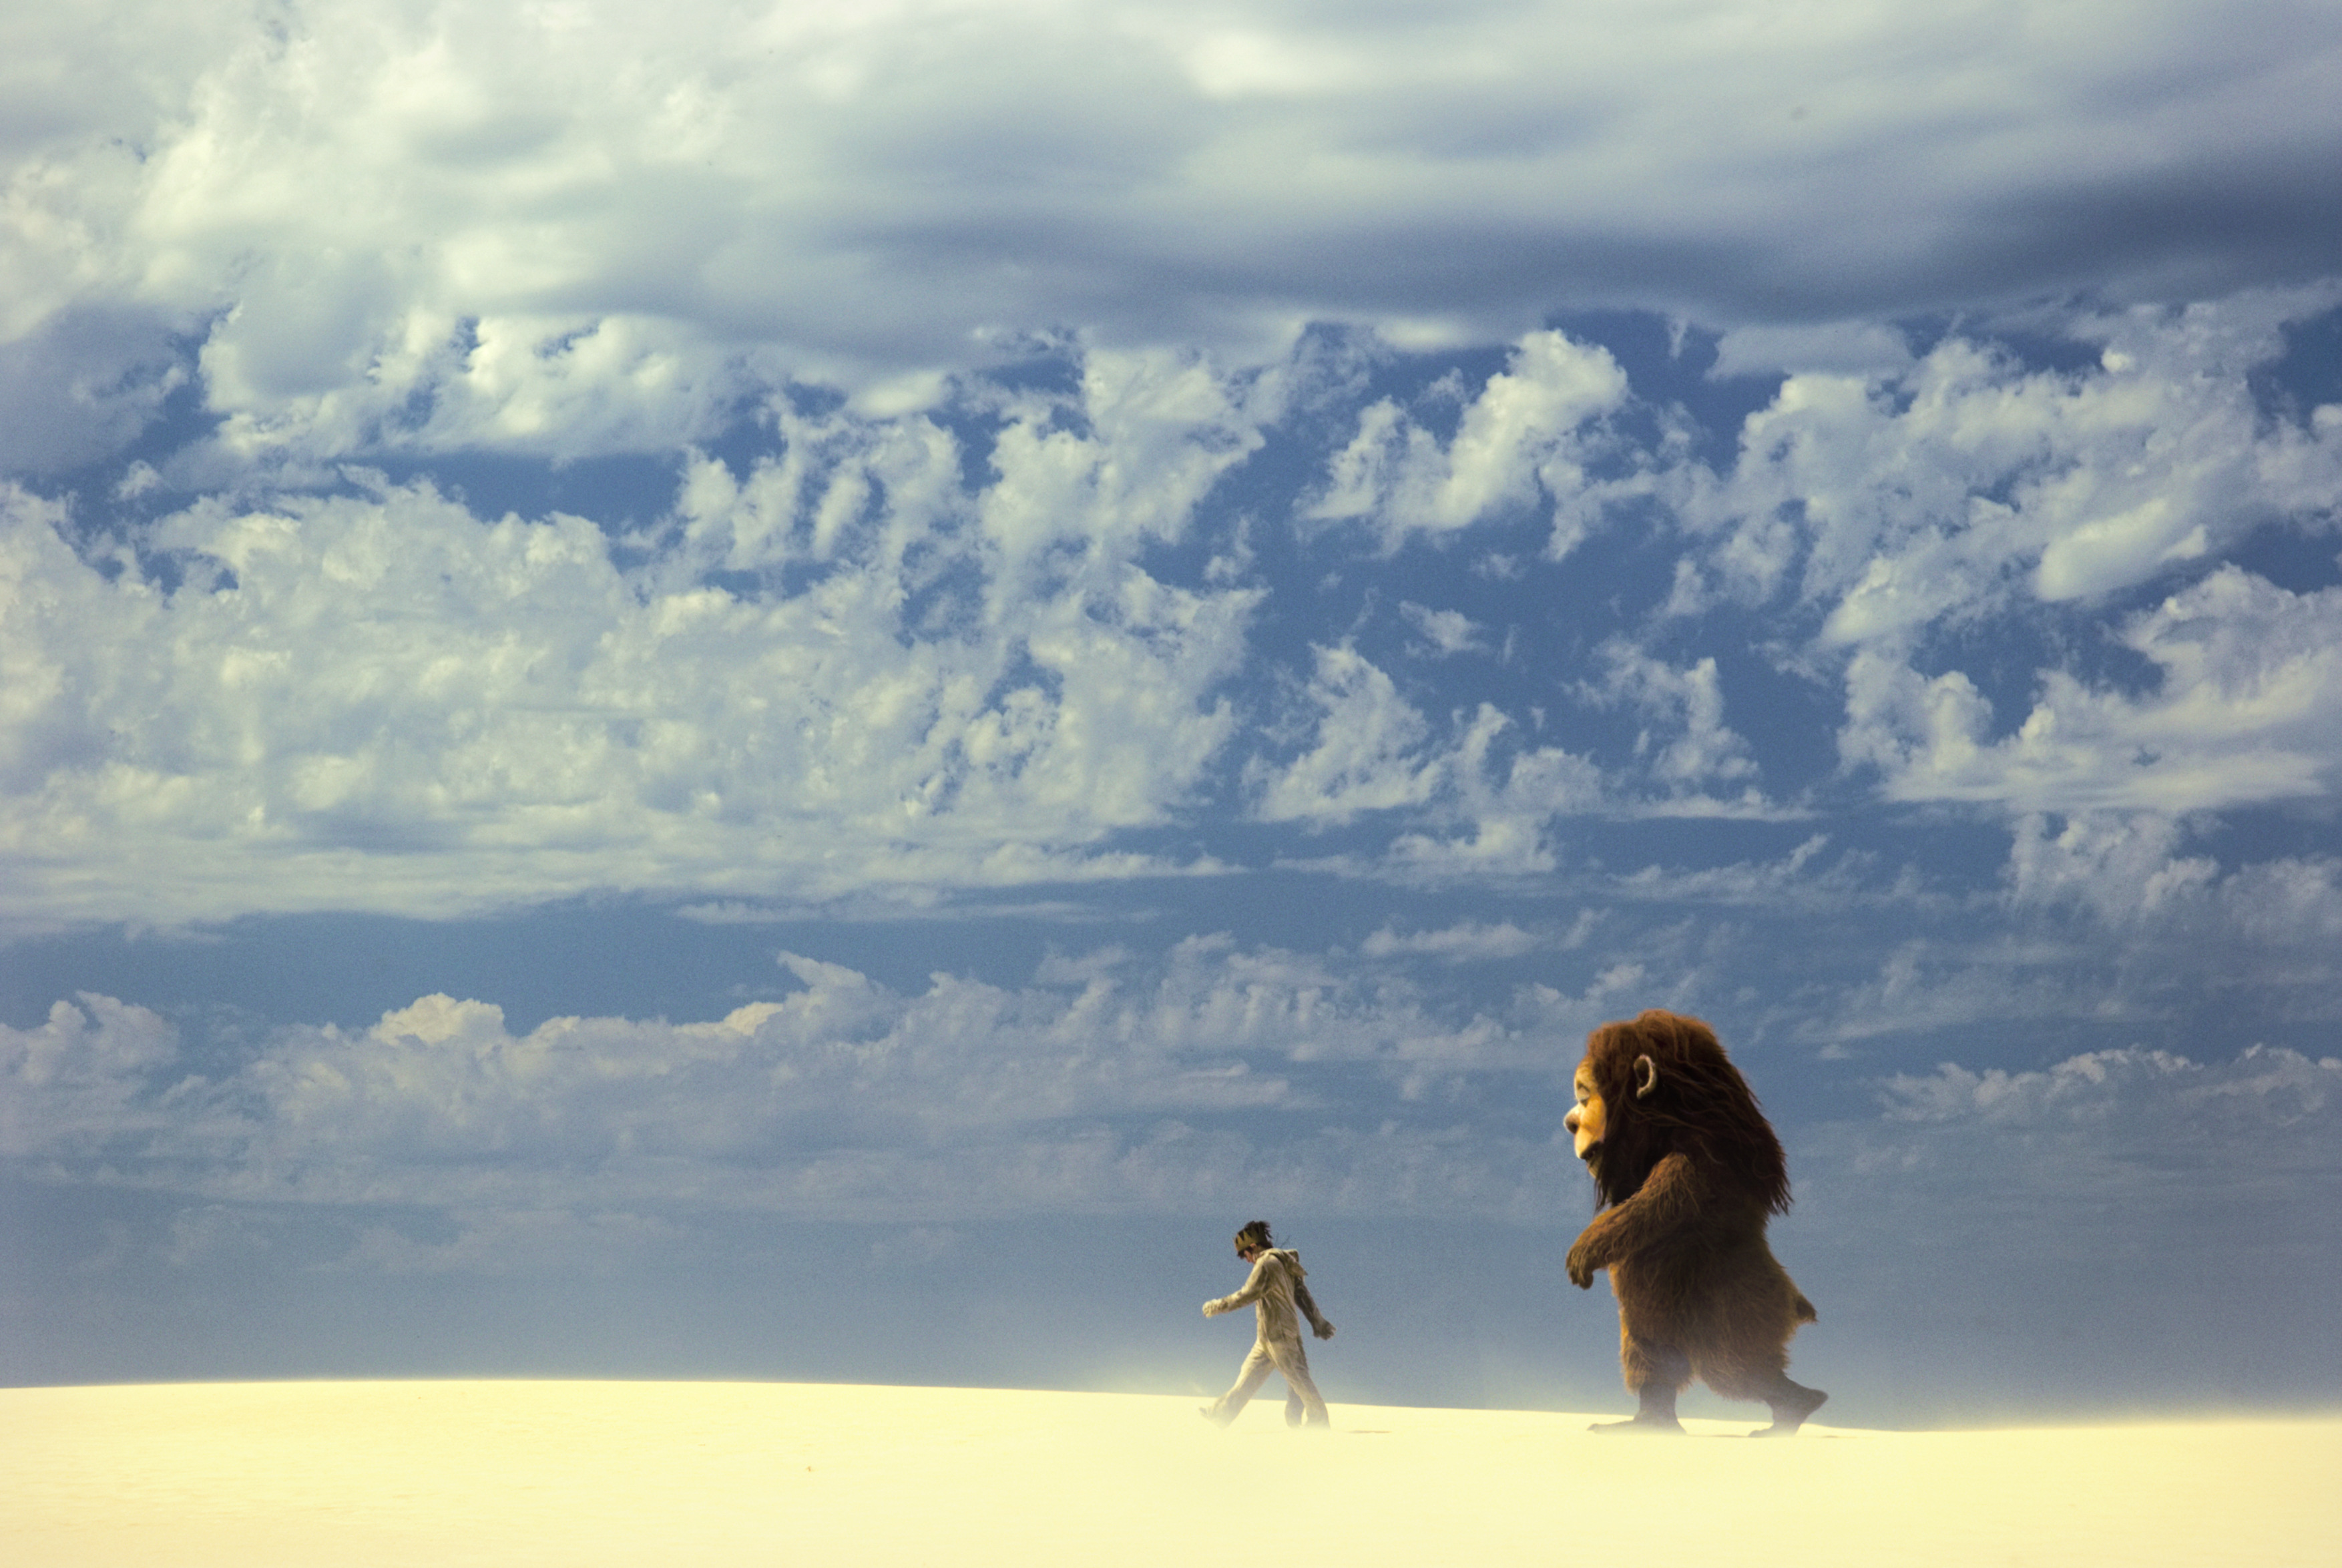 Movie Where The Wild Things Are 3508x2349